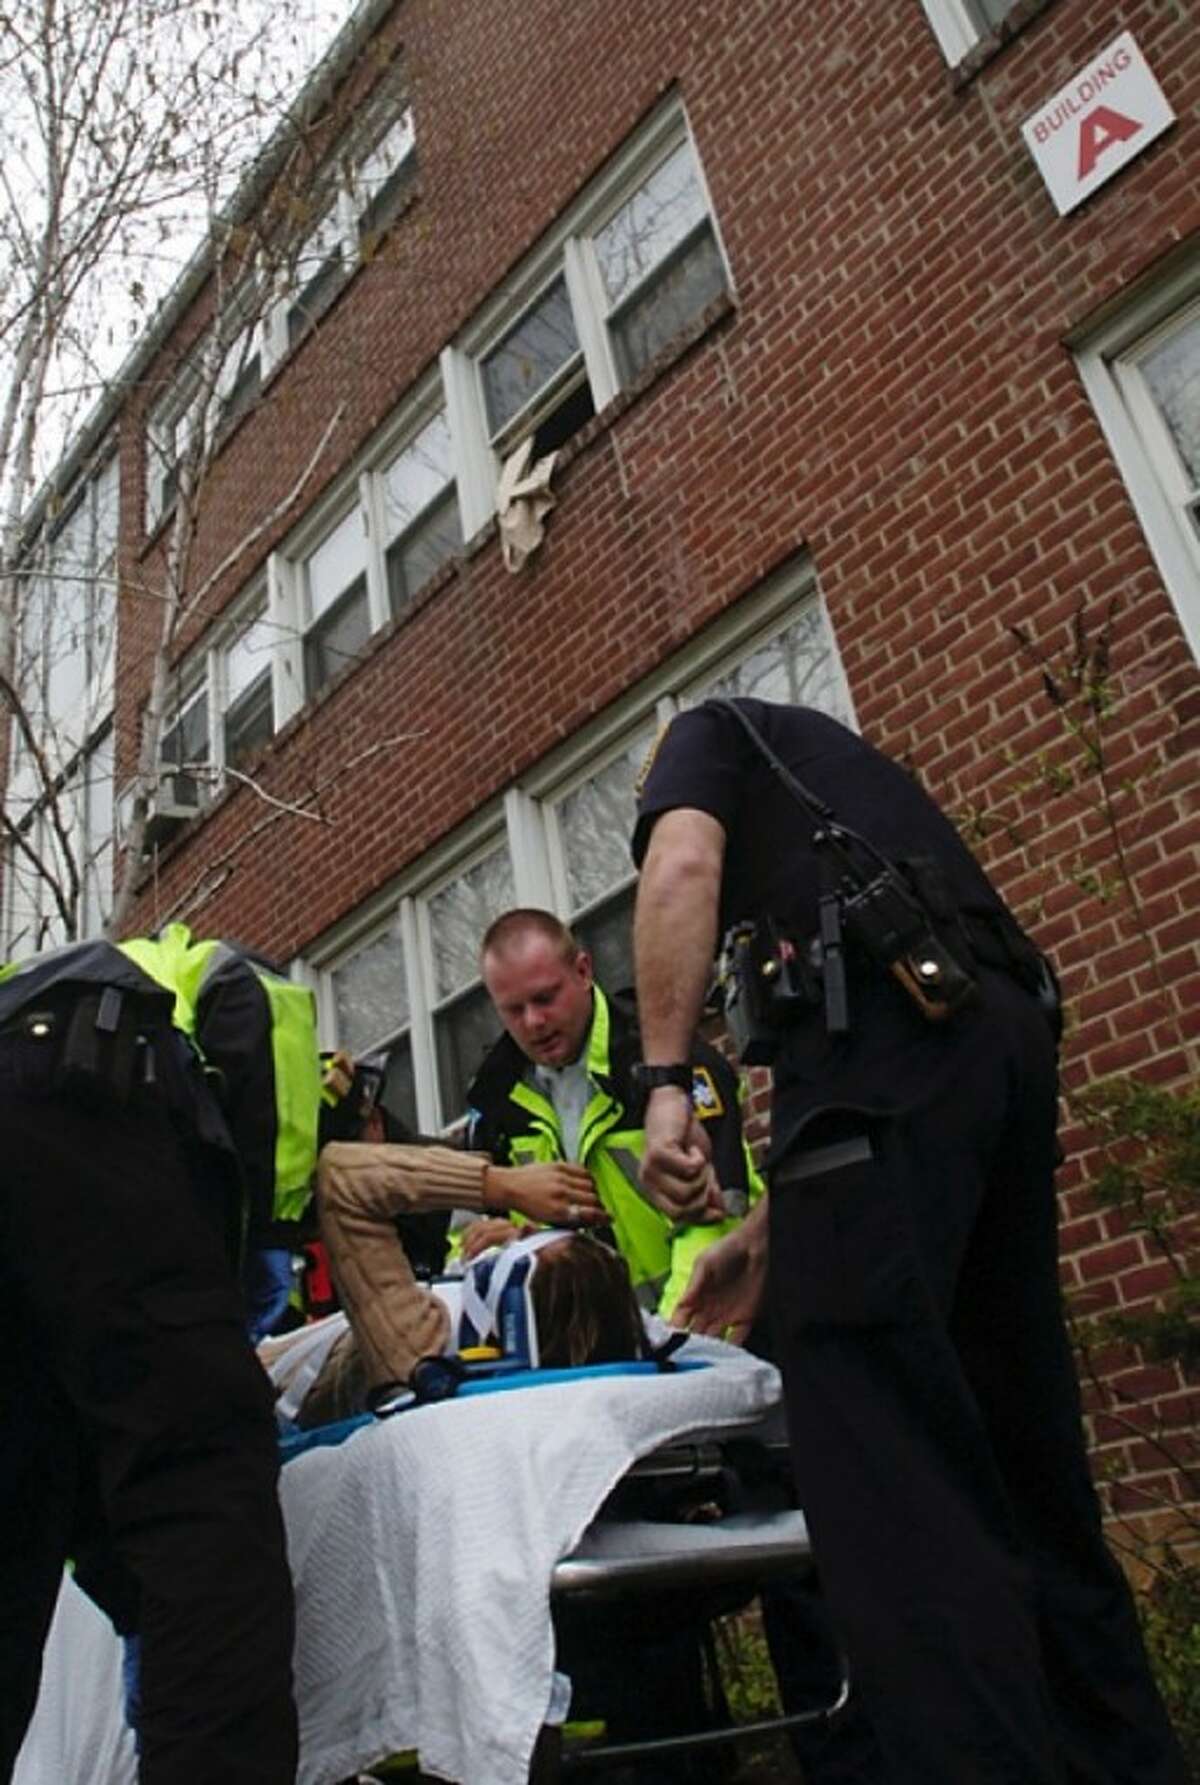 A woman is helped by emergency personnel after she jumps from her second story window when smoke from a cooking fire filled her apartment building on Strawberry Hill Ave Wednesday morning. Hour photo / Erik Trautmann